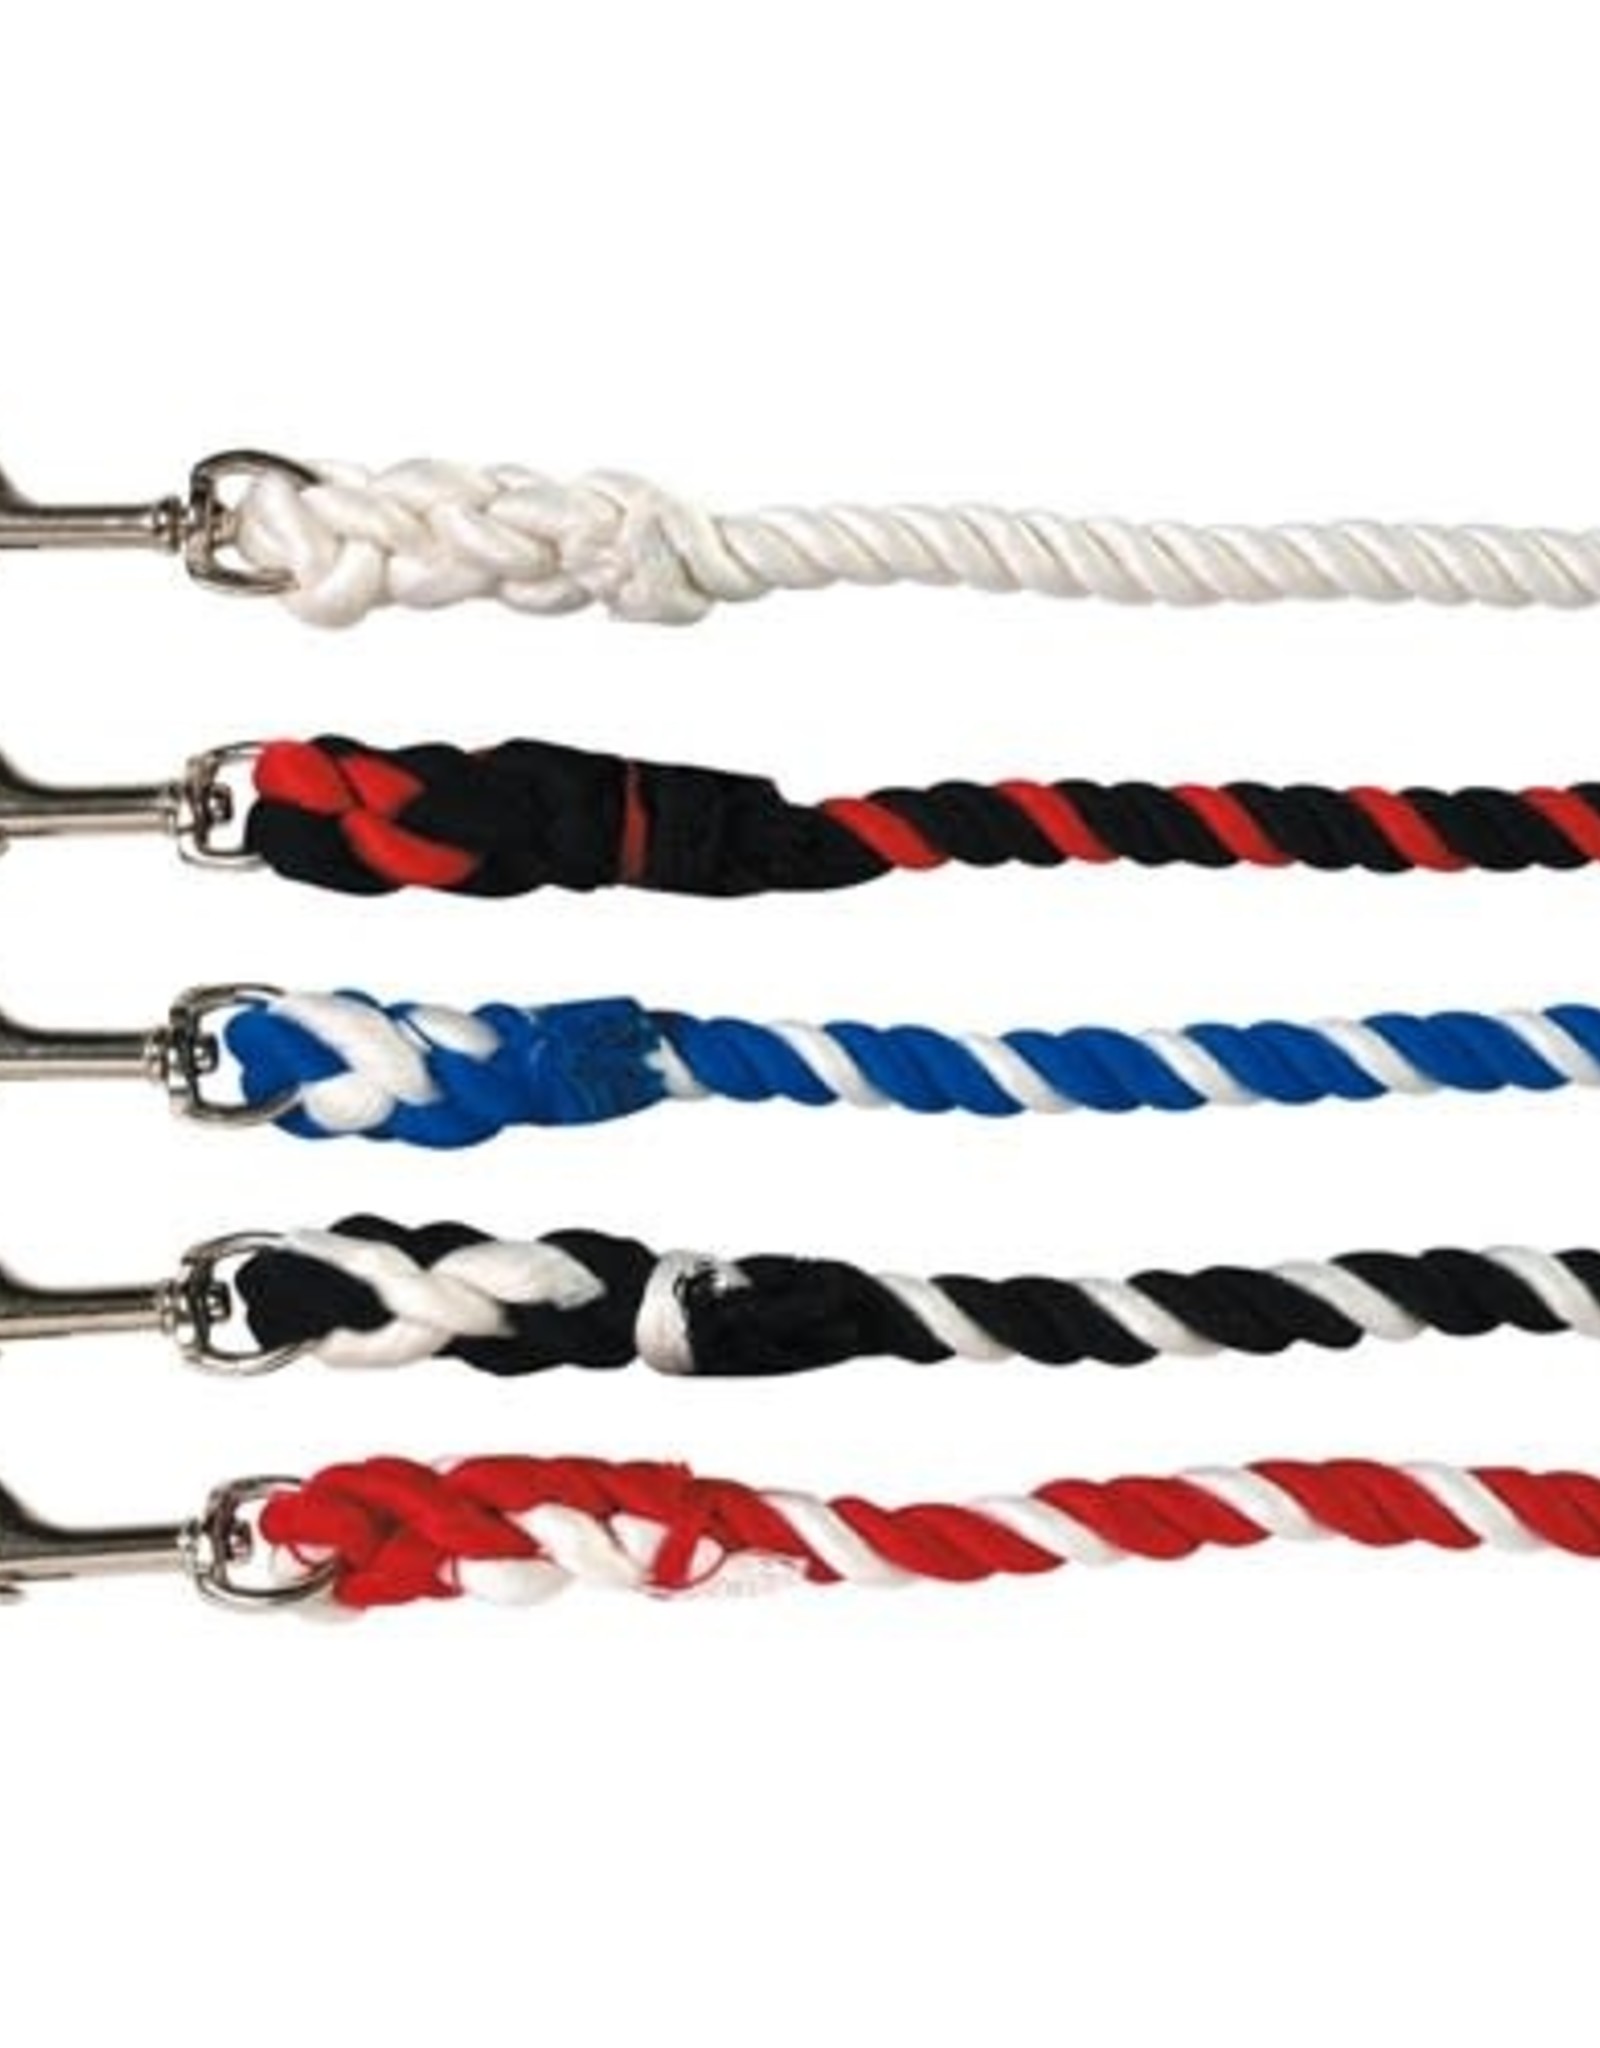 Rancher Lead Rope - Poly Cotton - 13m